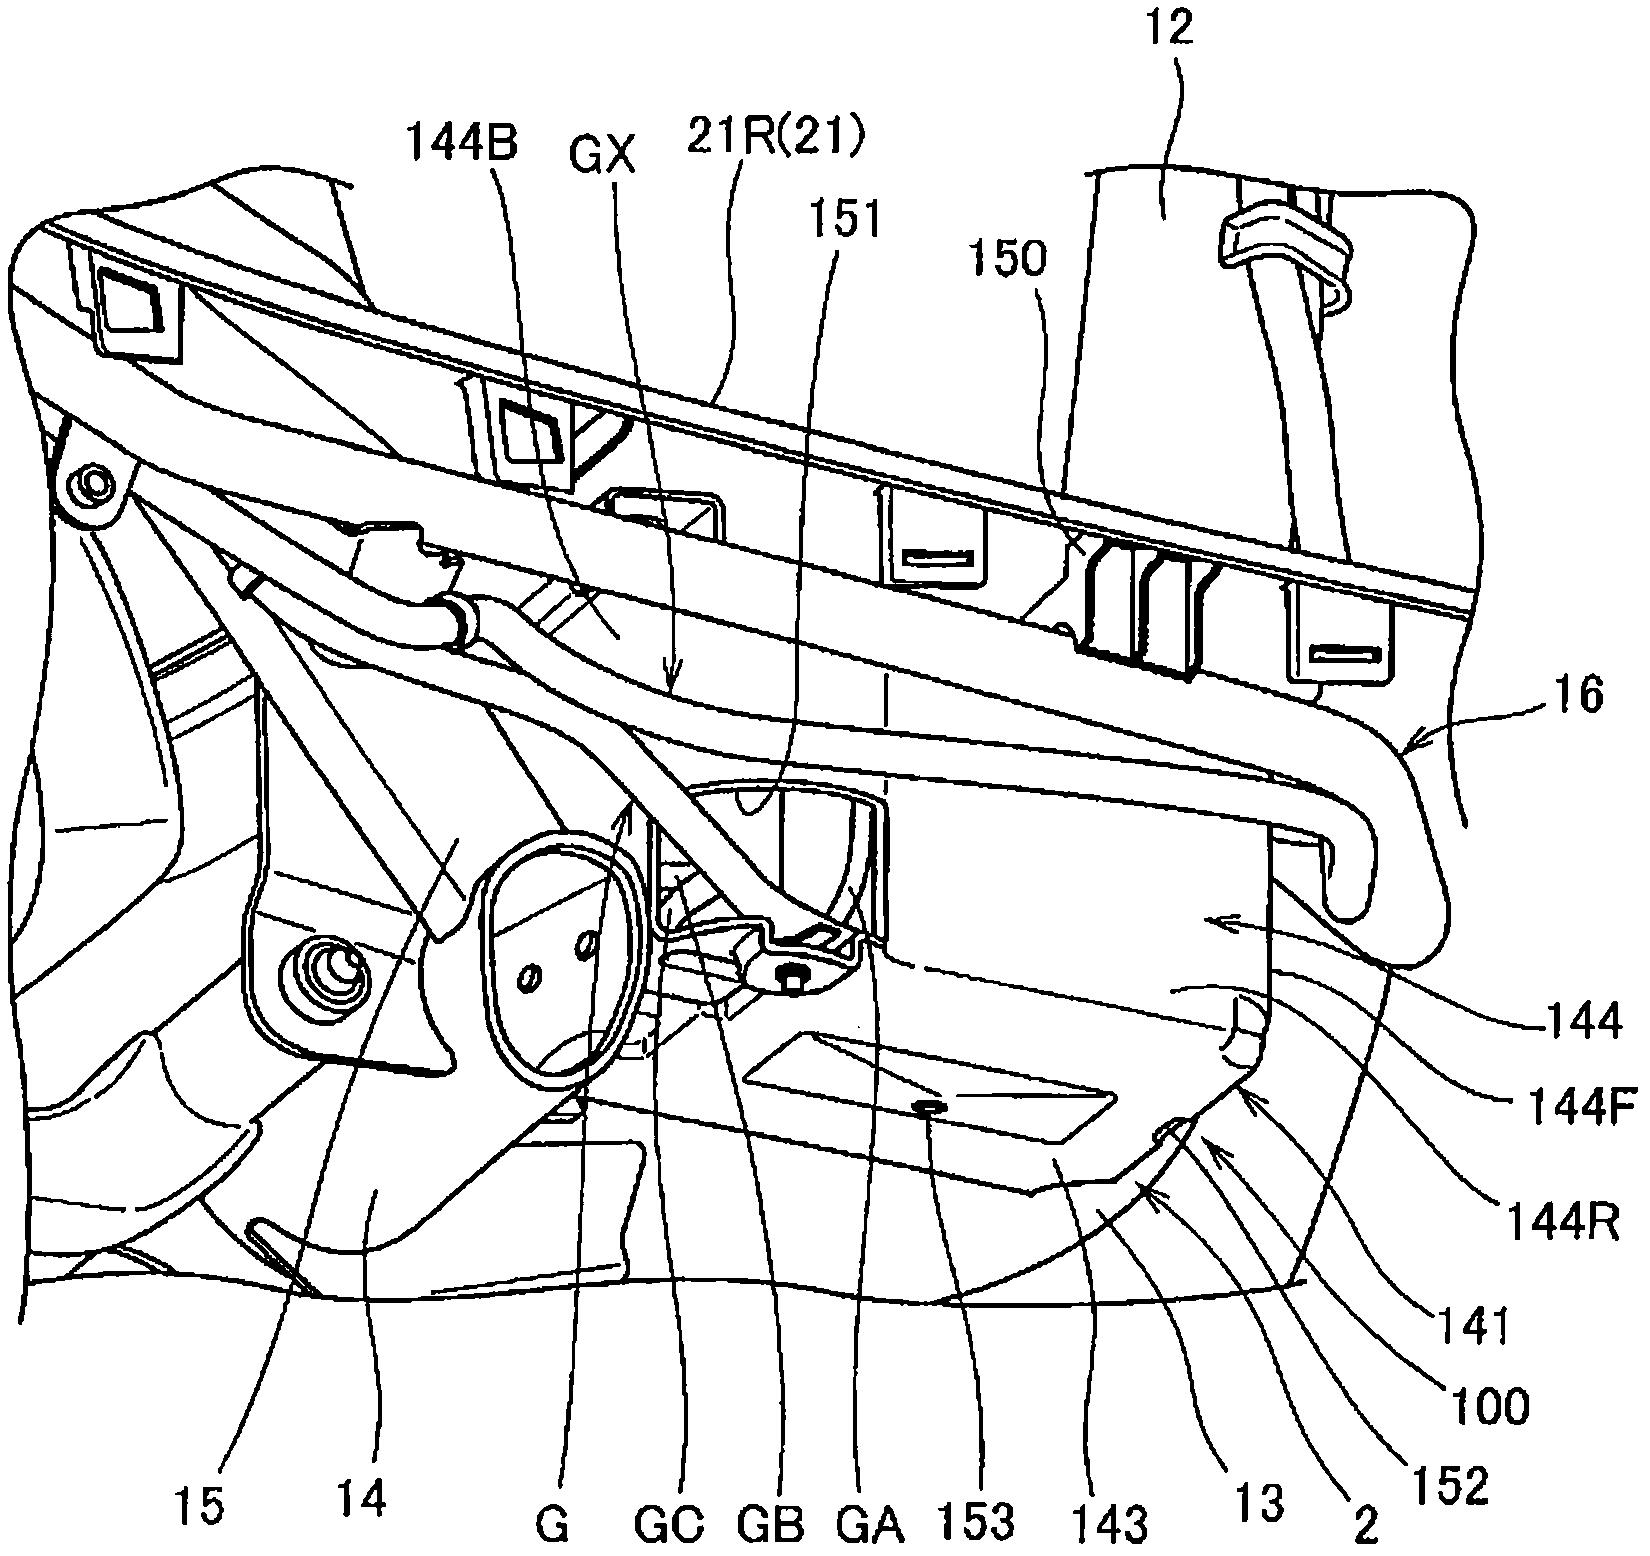 Waterproof structure of vehicle